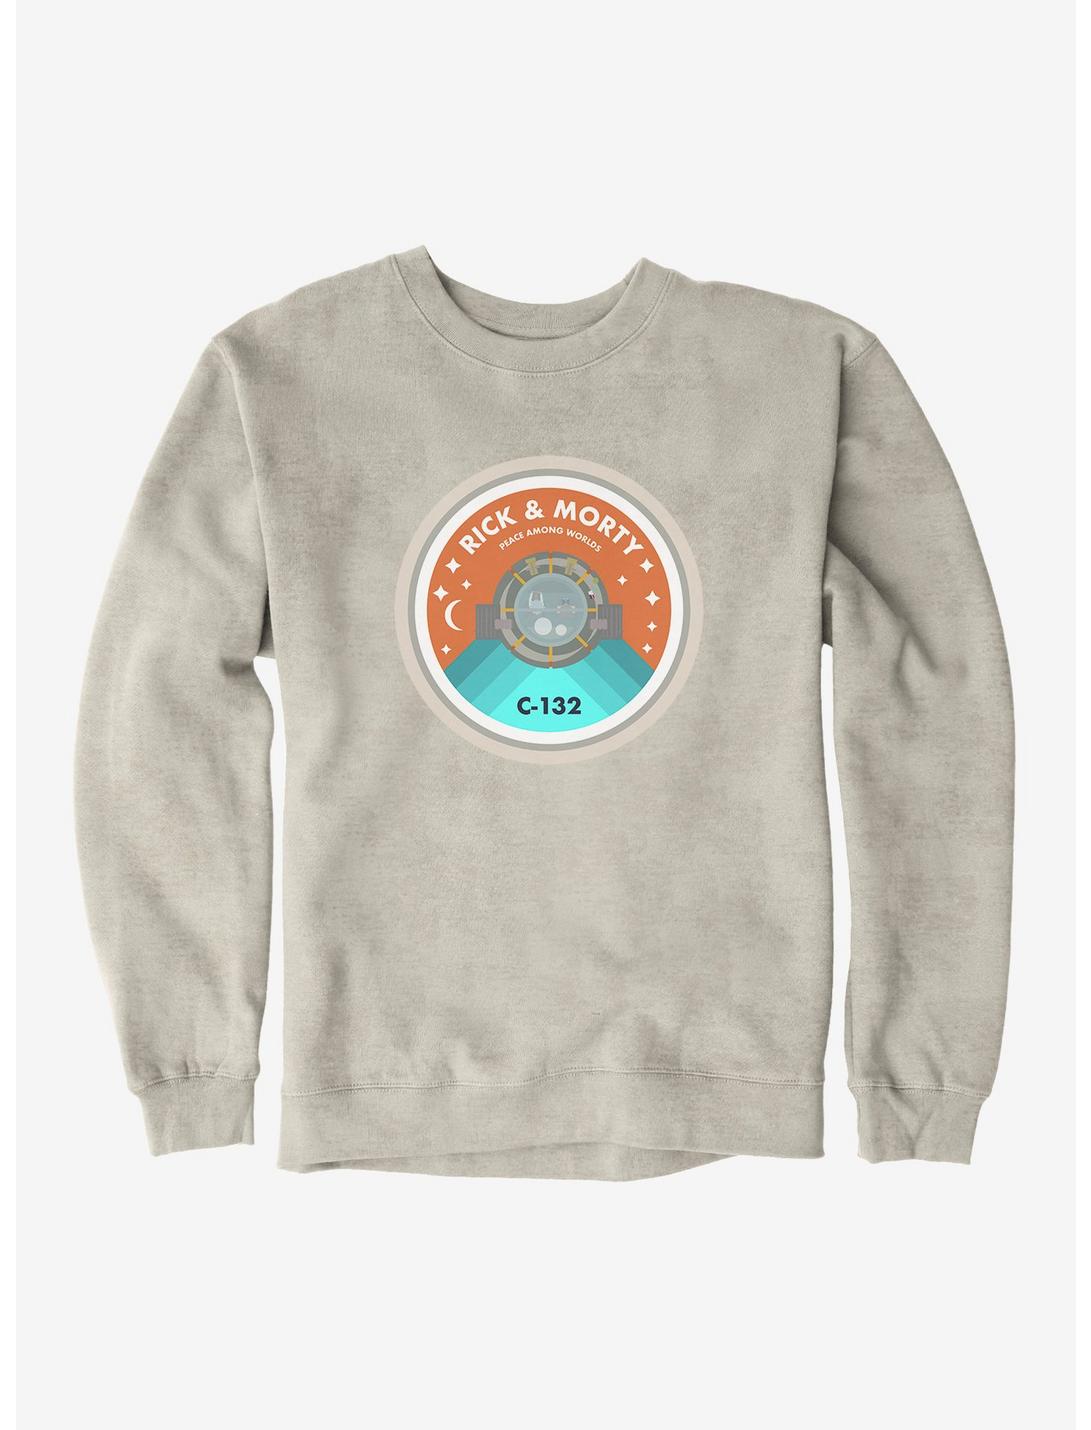 NEW & OFFICIAL! Rick And Morty 'Spaceship' Crew Neck Sweatshirt